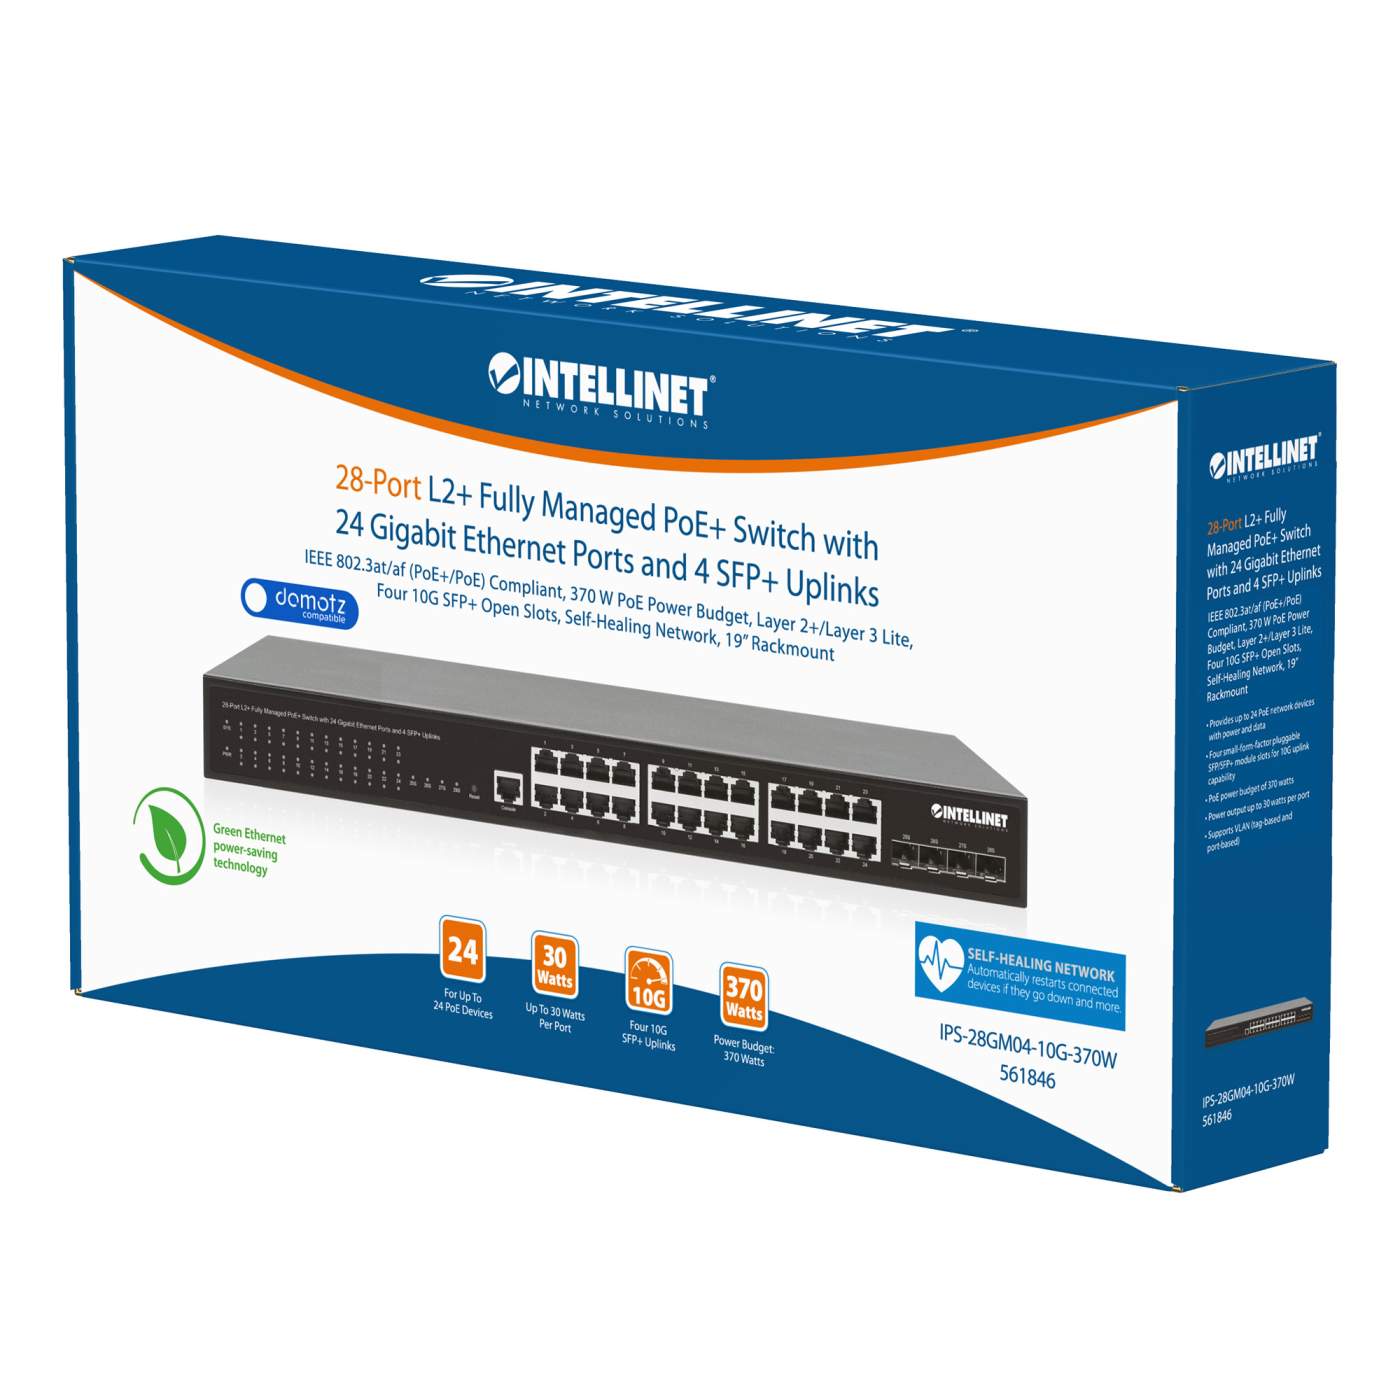 28-Port L2+ Fully Managed PoE+ Switch with 24 Gigabit Ethernet Ports and 4 SFP+ Uplinks Packaging Image 2